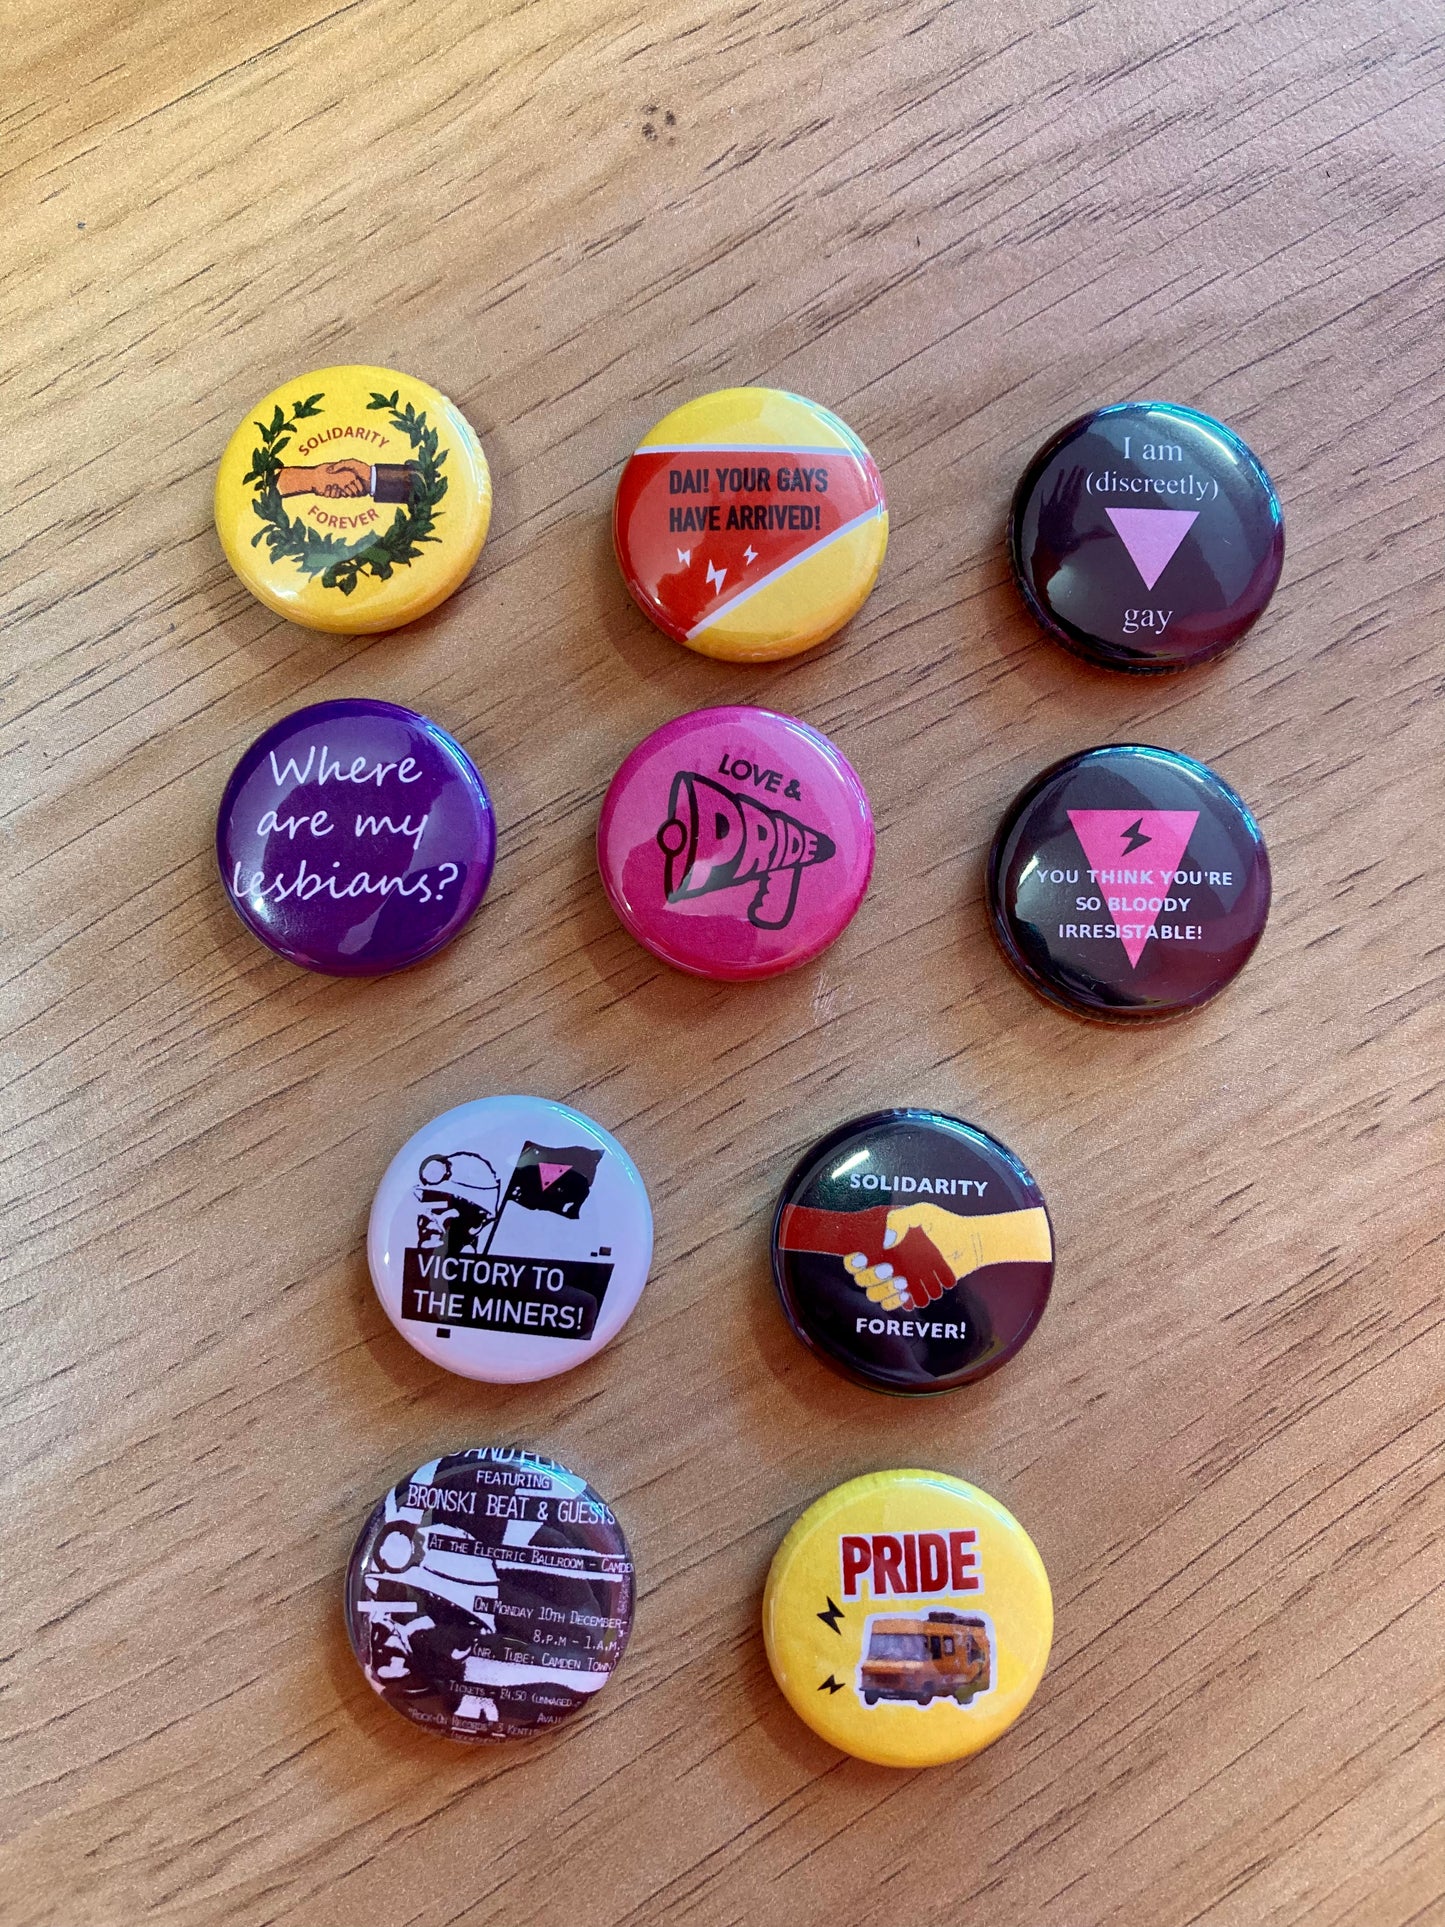 A selection of retro pride badges with references to the film Pride and the activist group Lesbians and Gays Support the Miners.